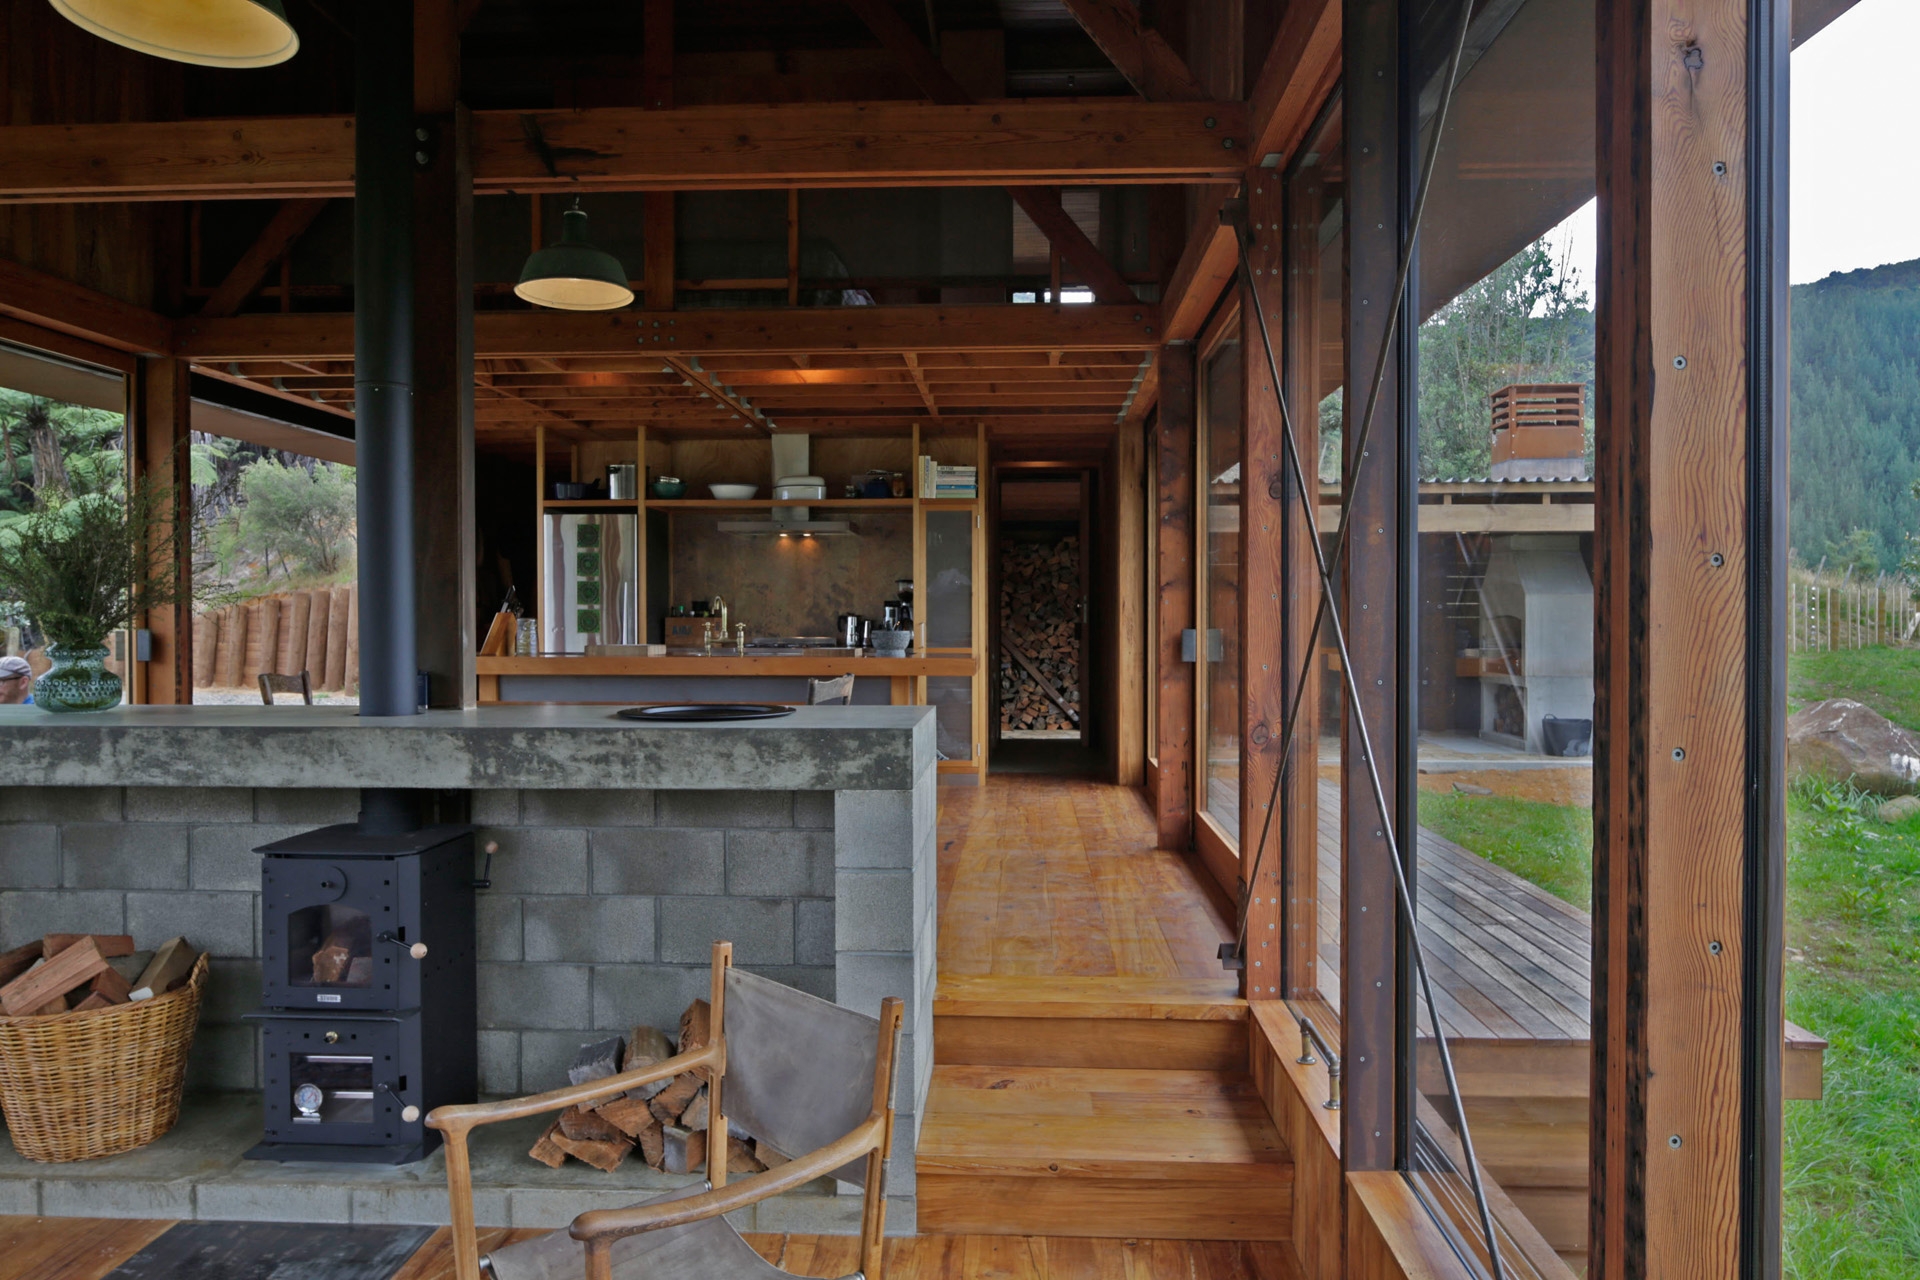 Long view of the living room and kitchen surrounded by natural materials